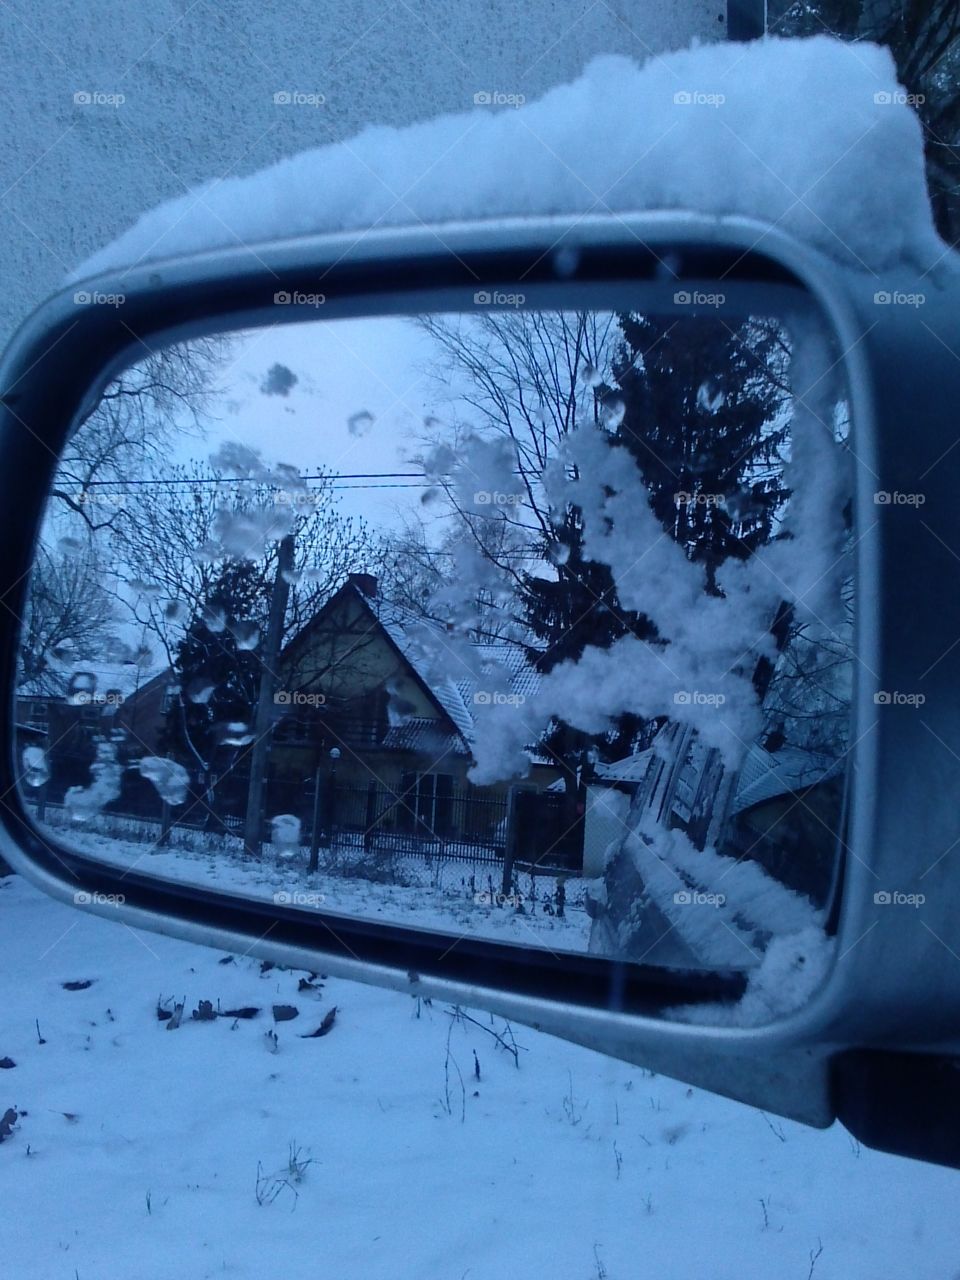 objects in the winter mirror